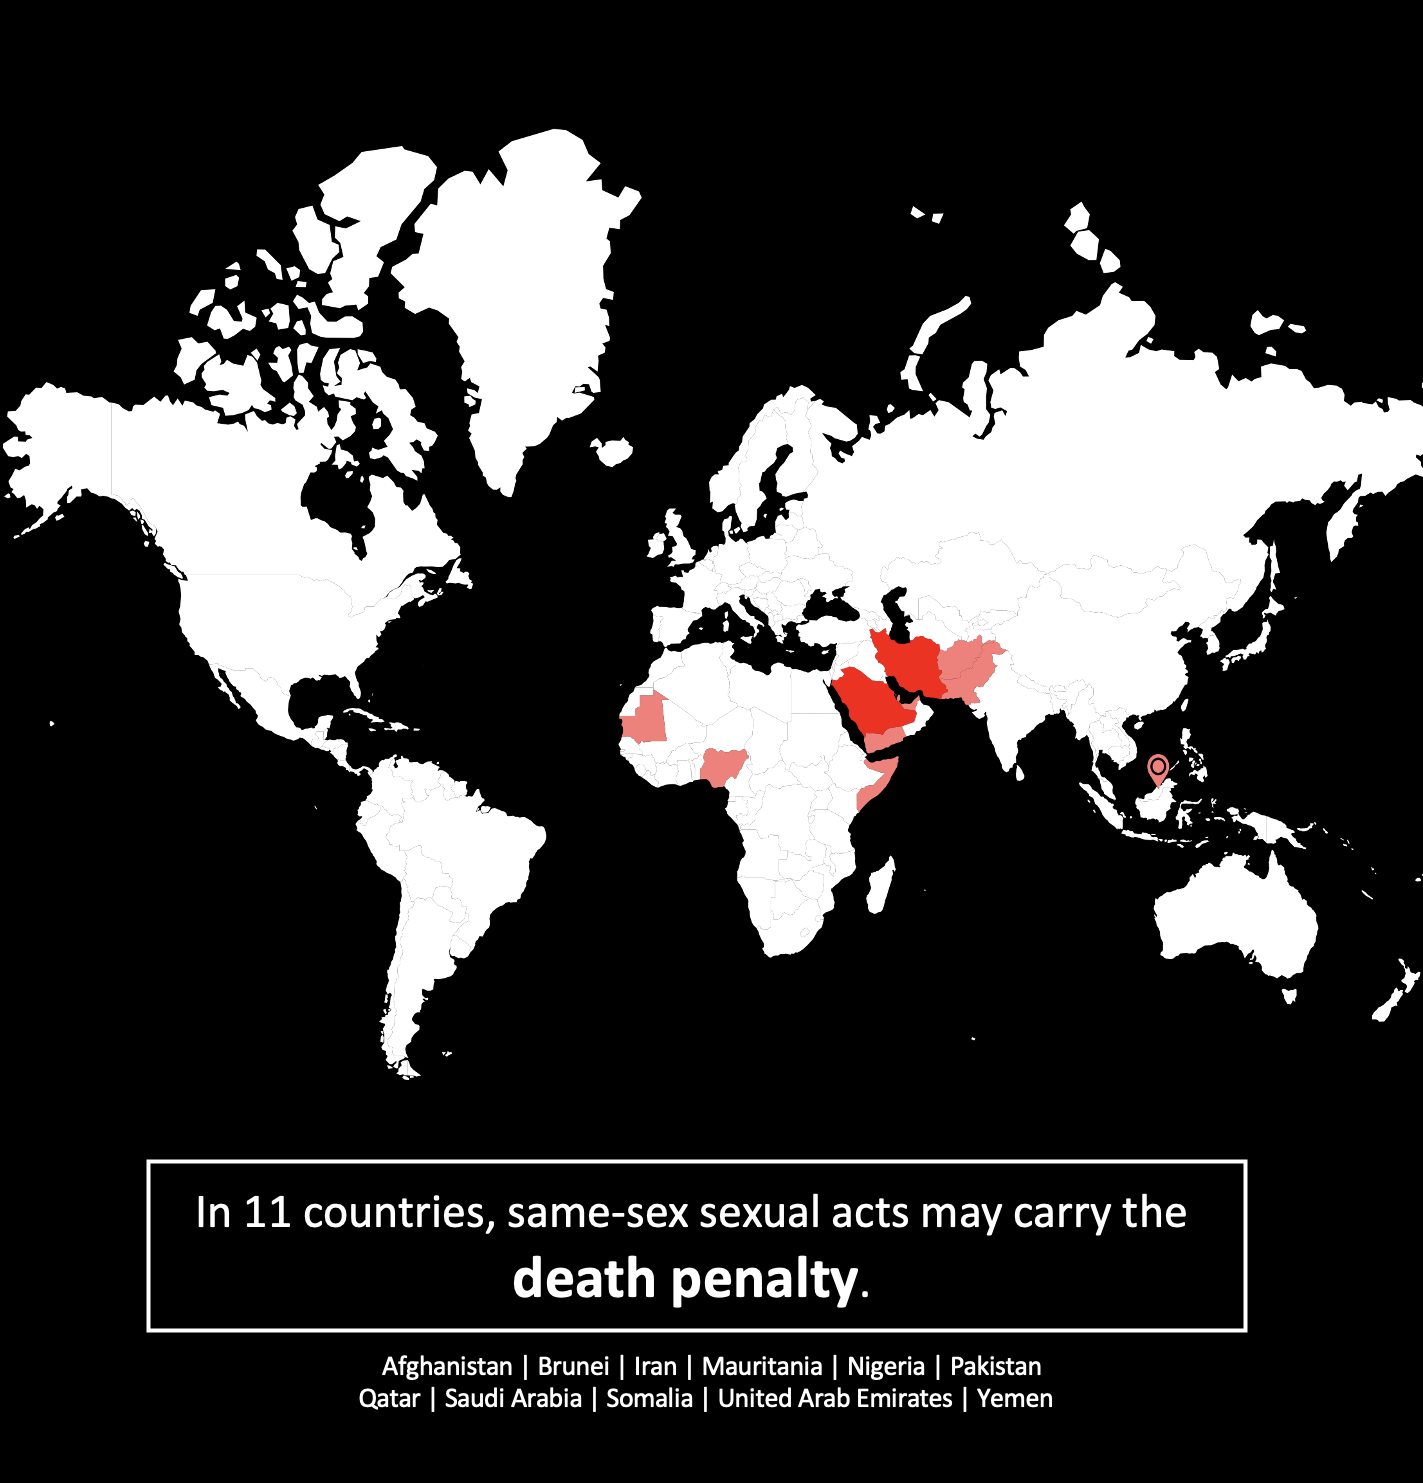 Map that says in 11 countries, same-sex sexual activity may carry the death penalty.